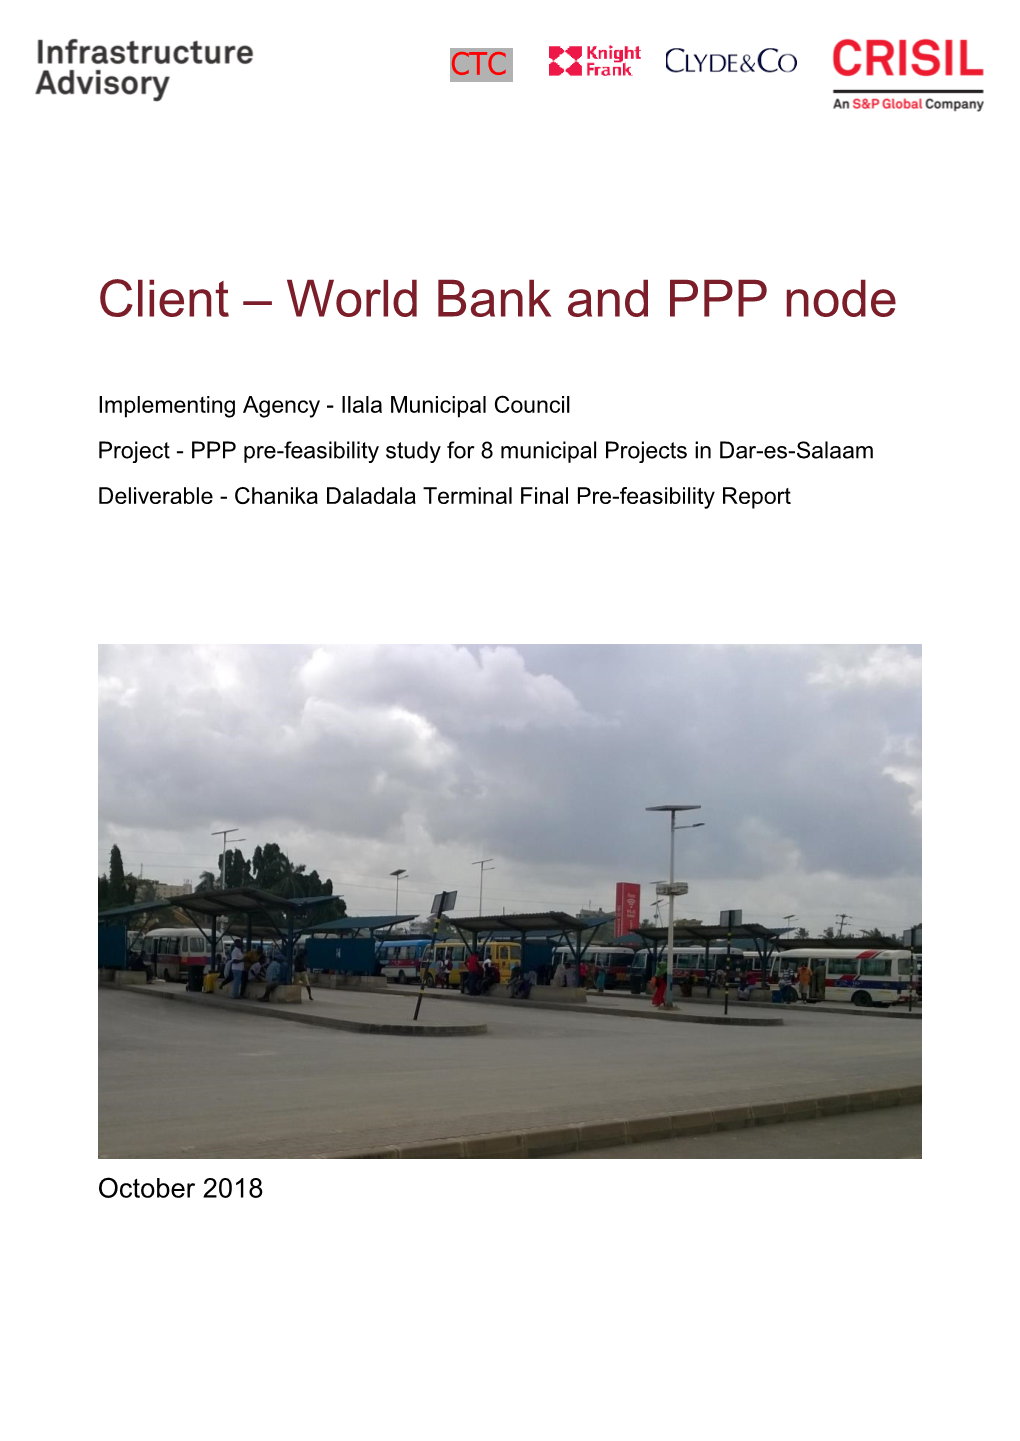 Client – World Bank and PPP Node